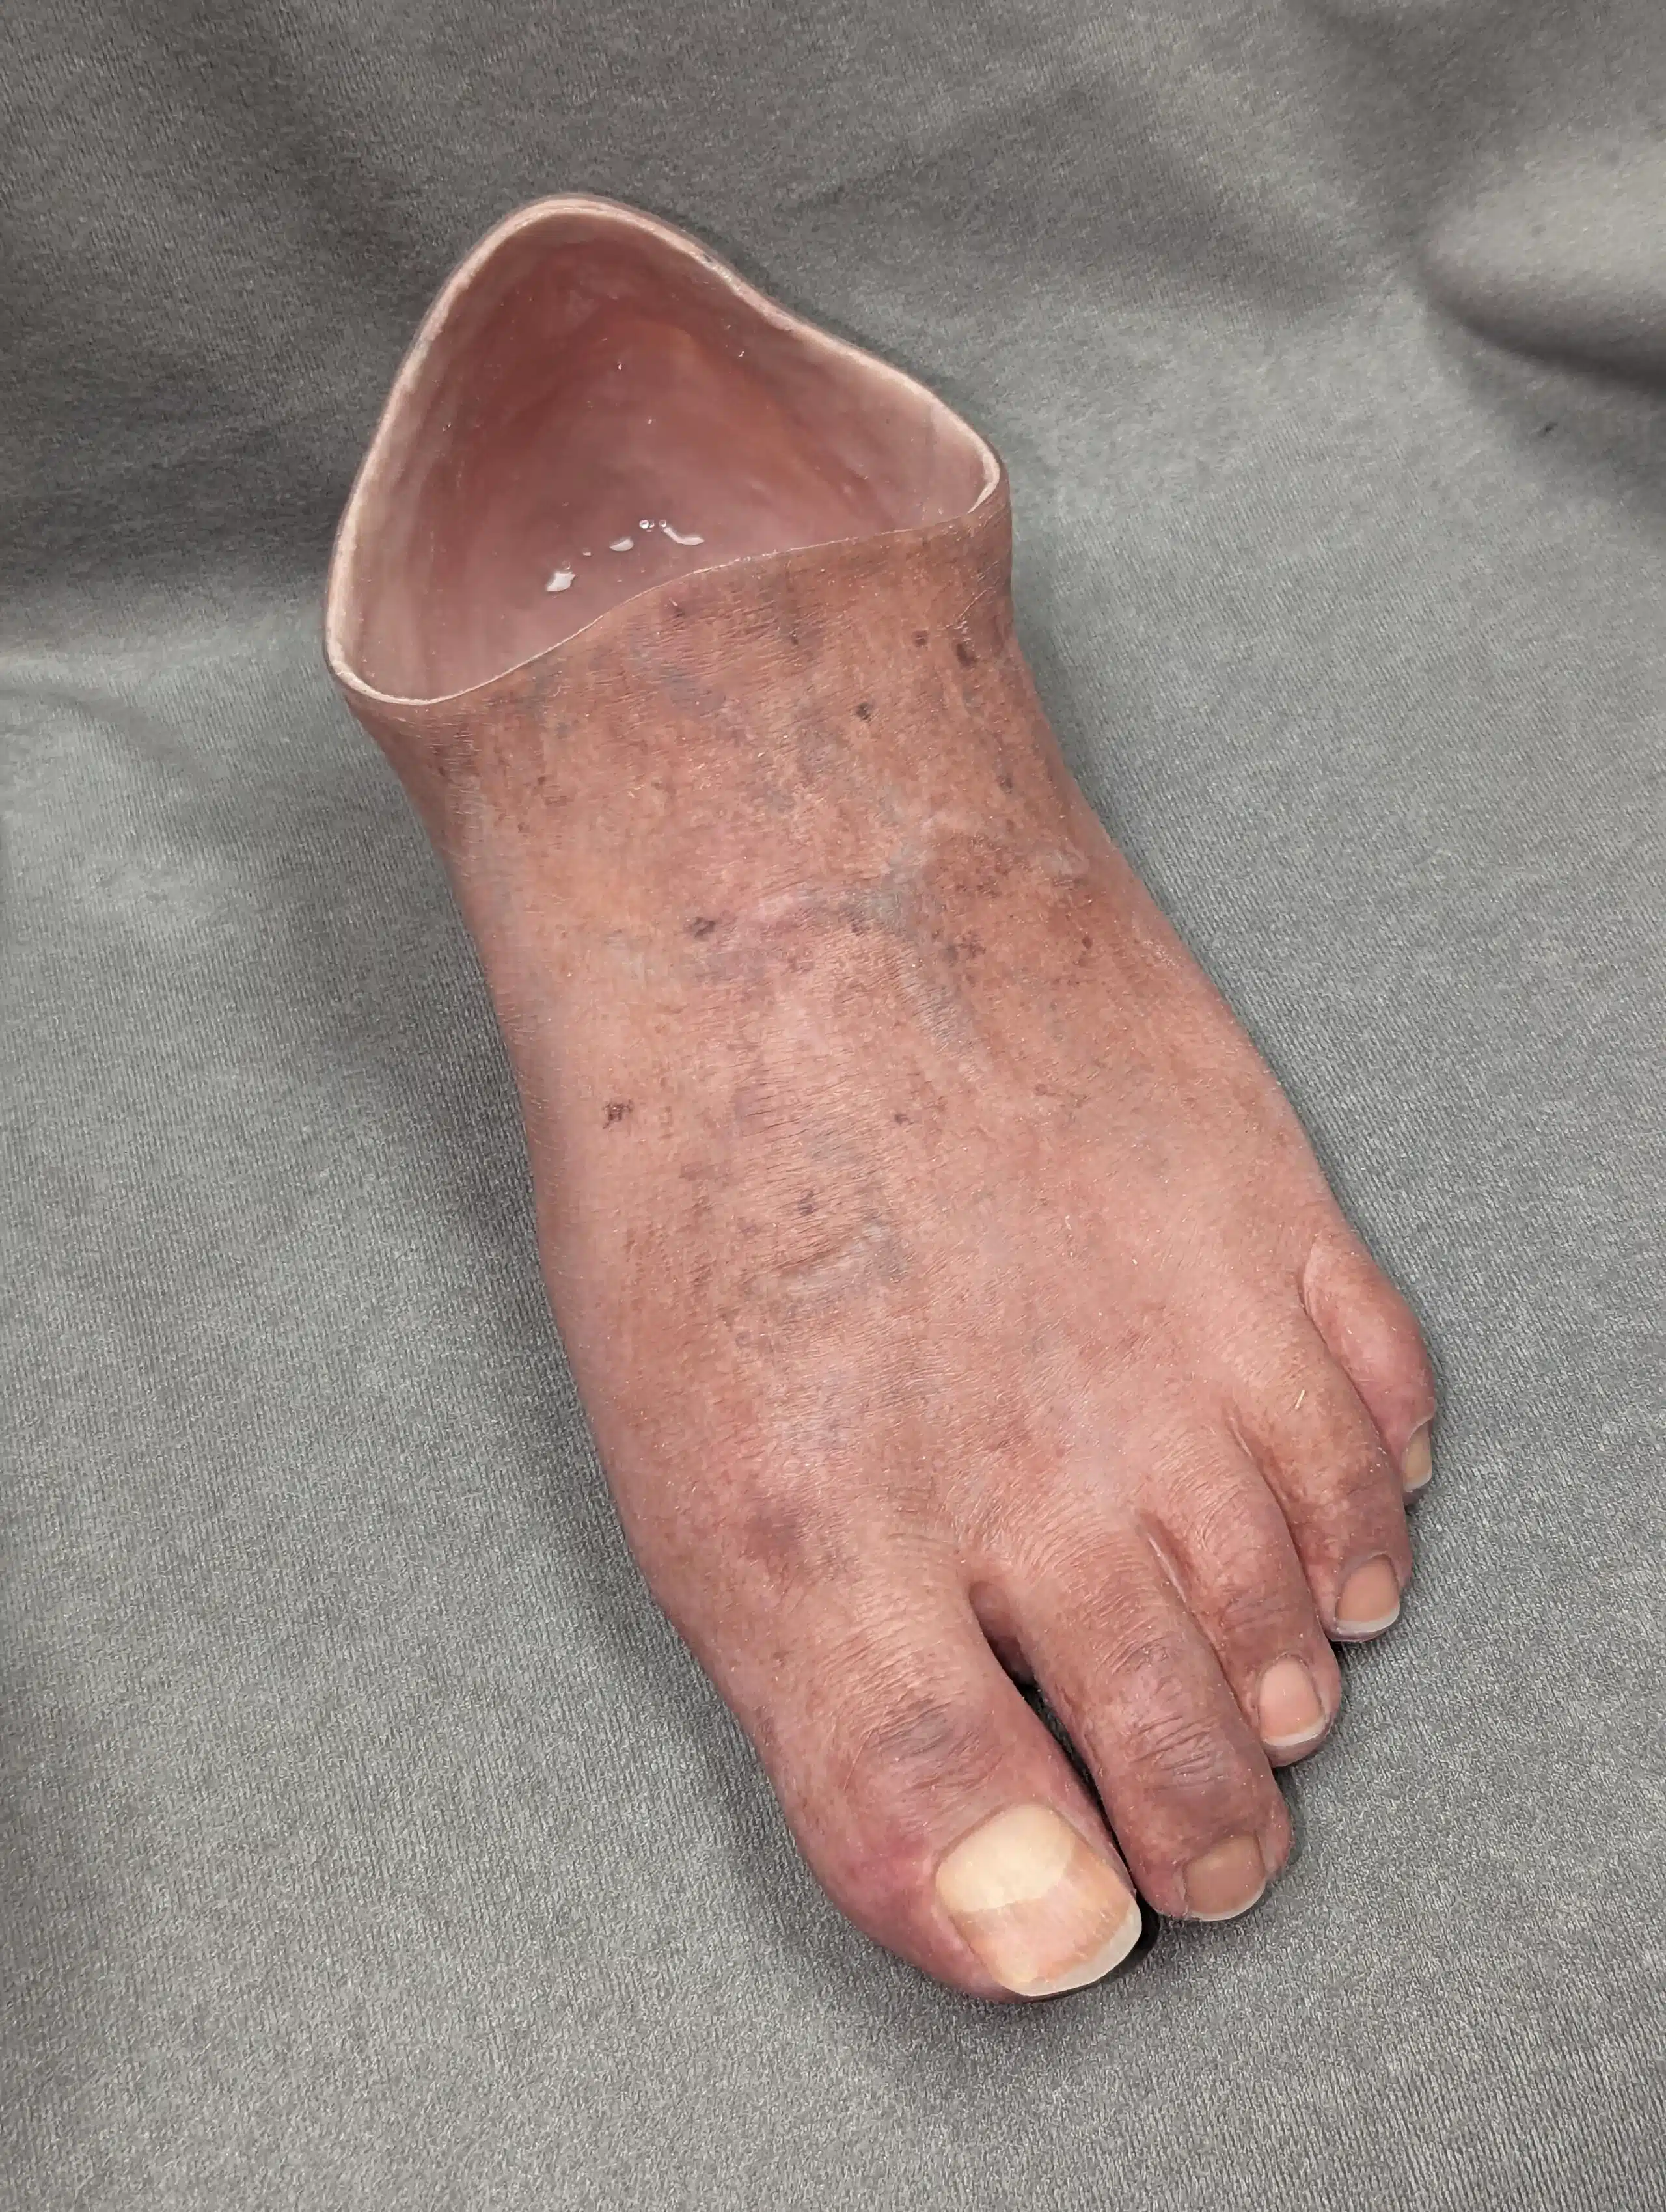 A foot with a vein on it's side.